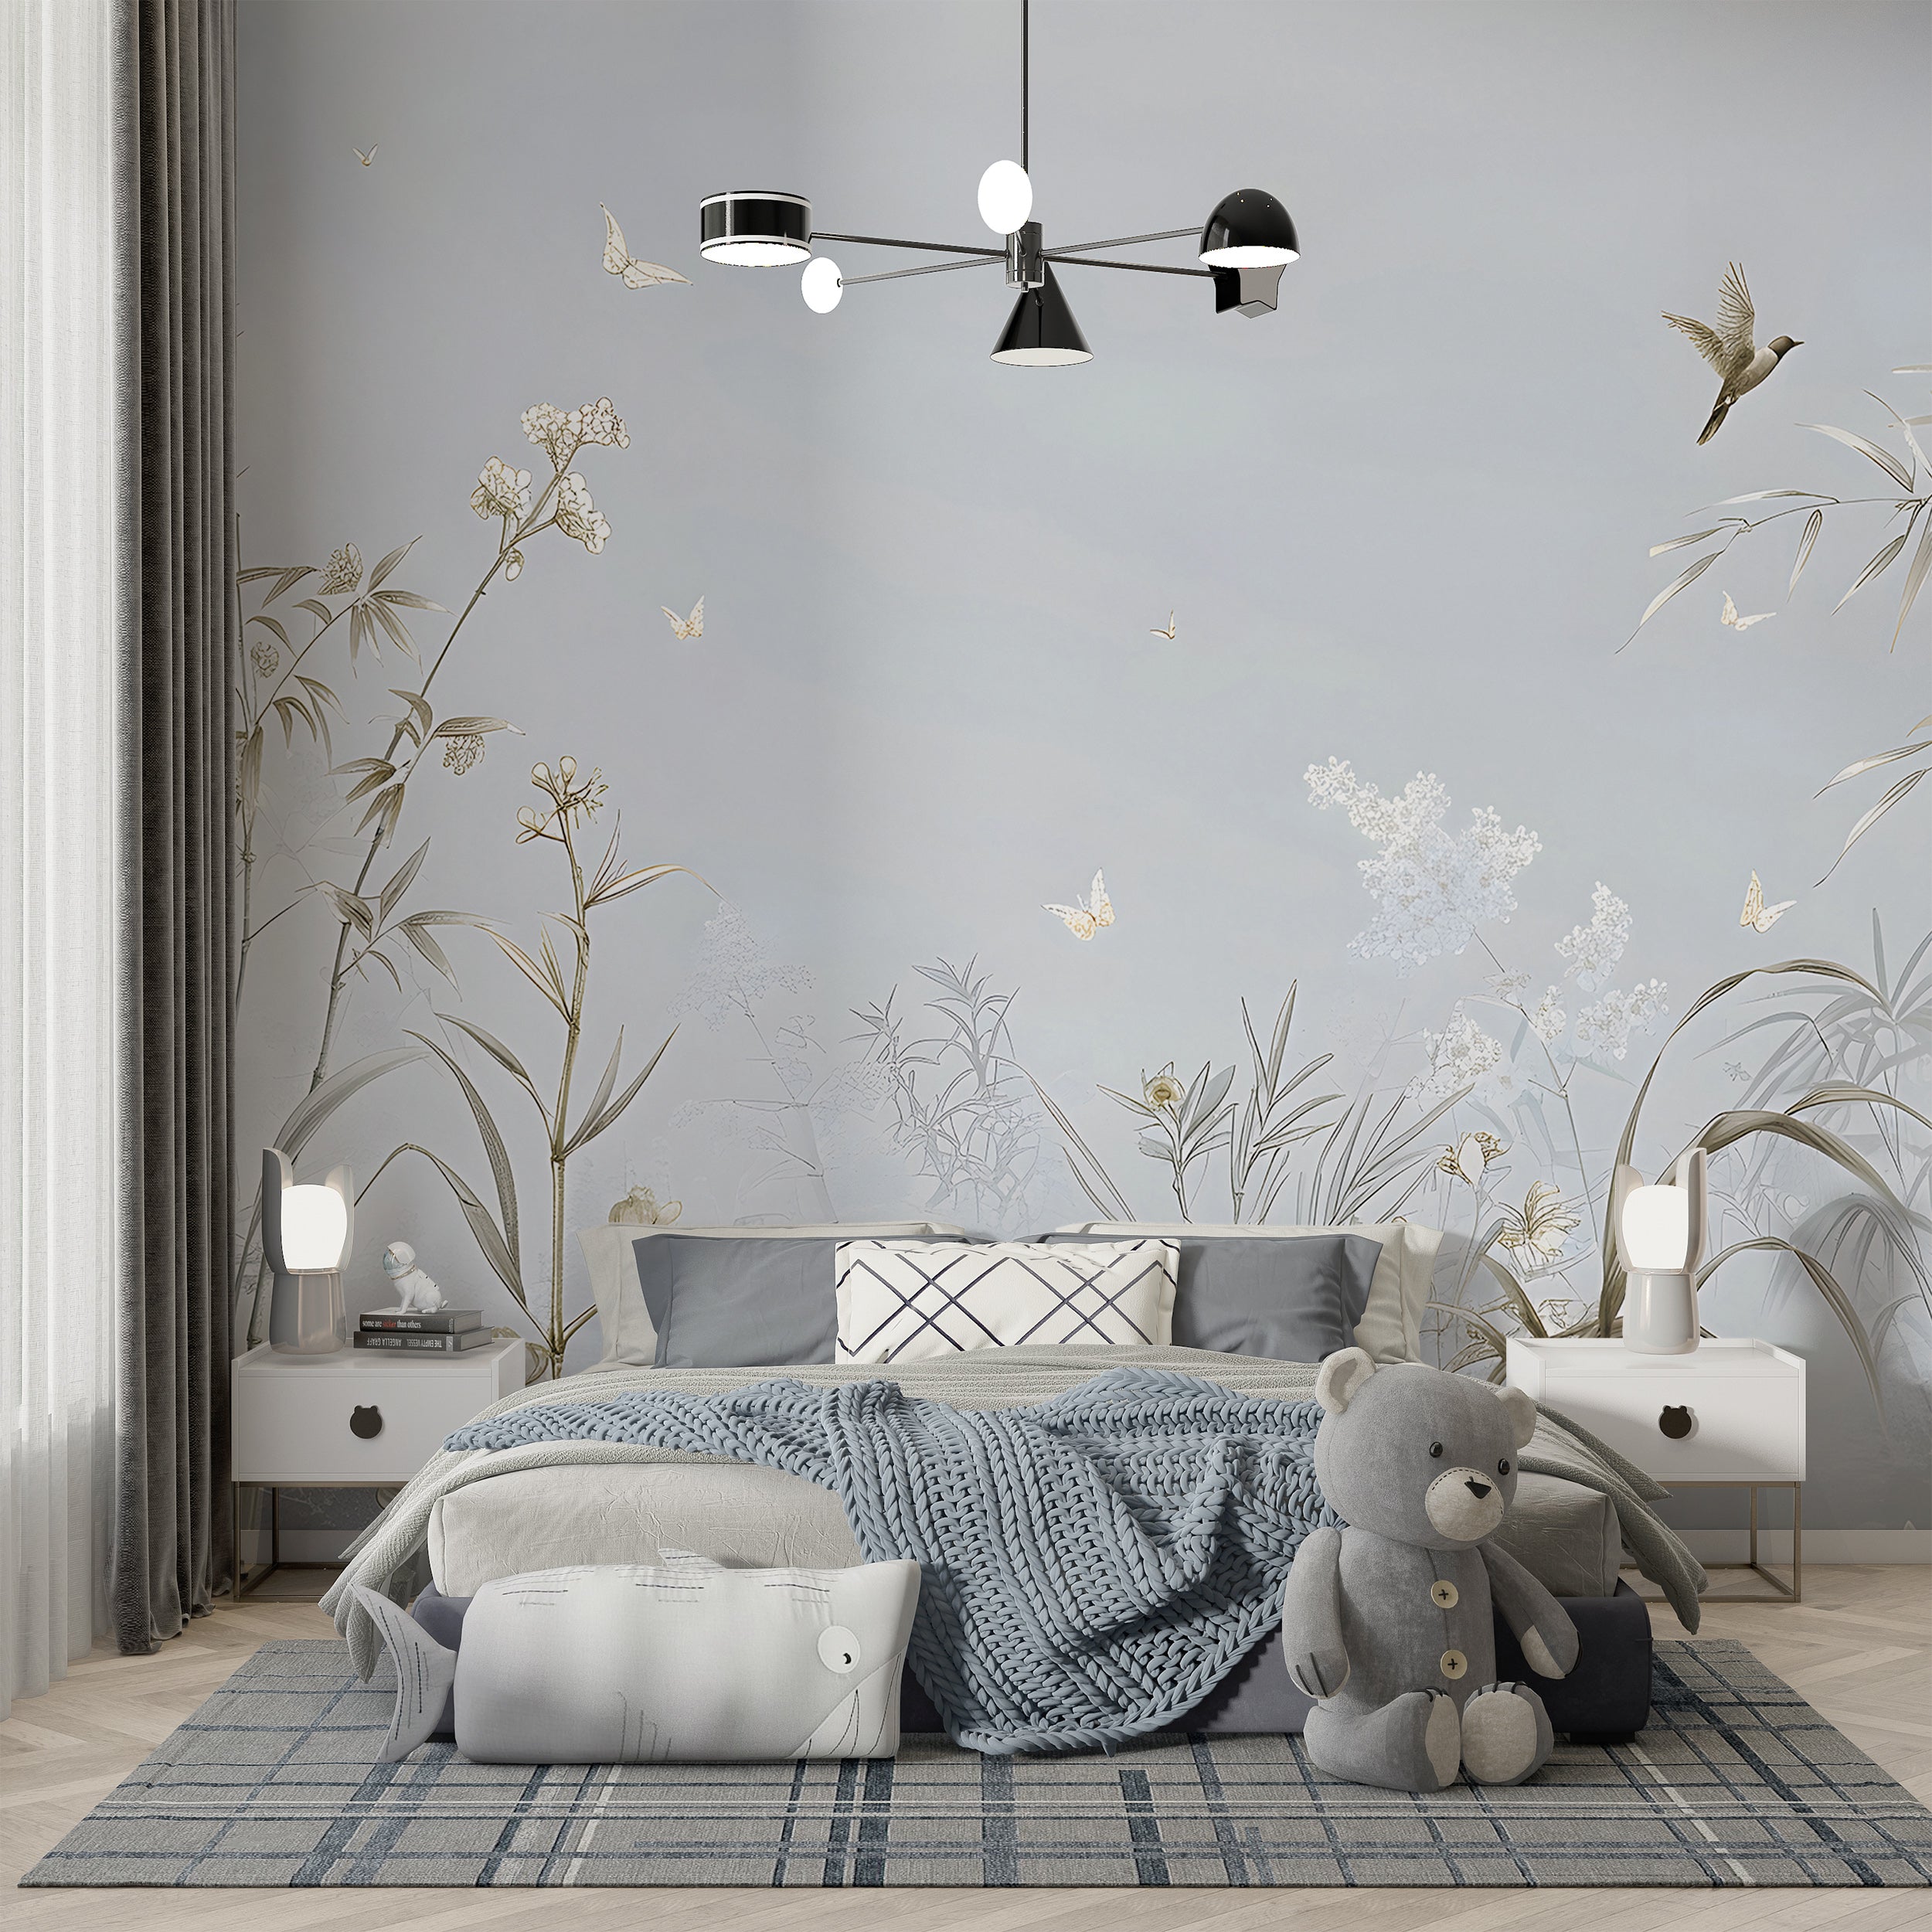 Pastel-colored chinoiserie mural for interior design